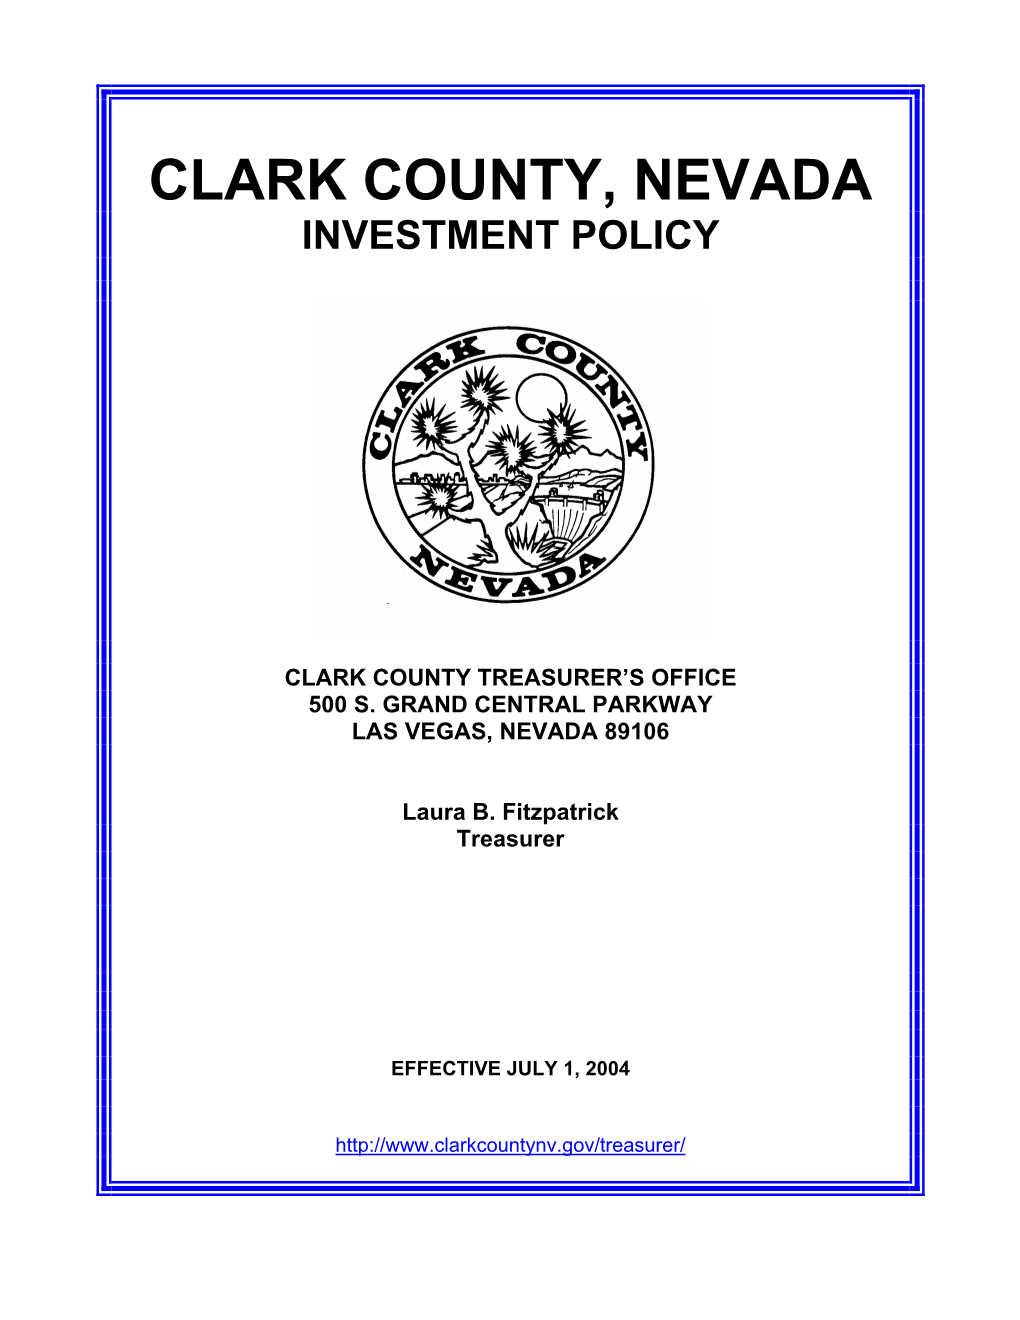 Clark County, Nevada Investment Policy